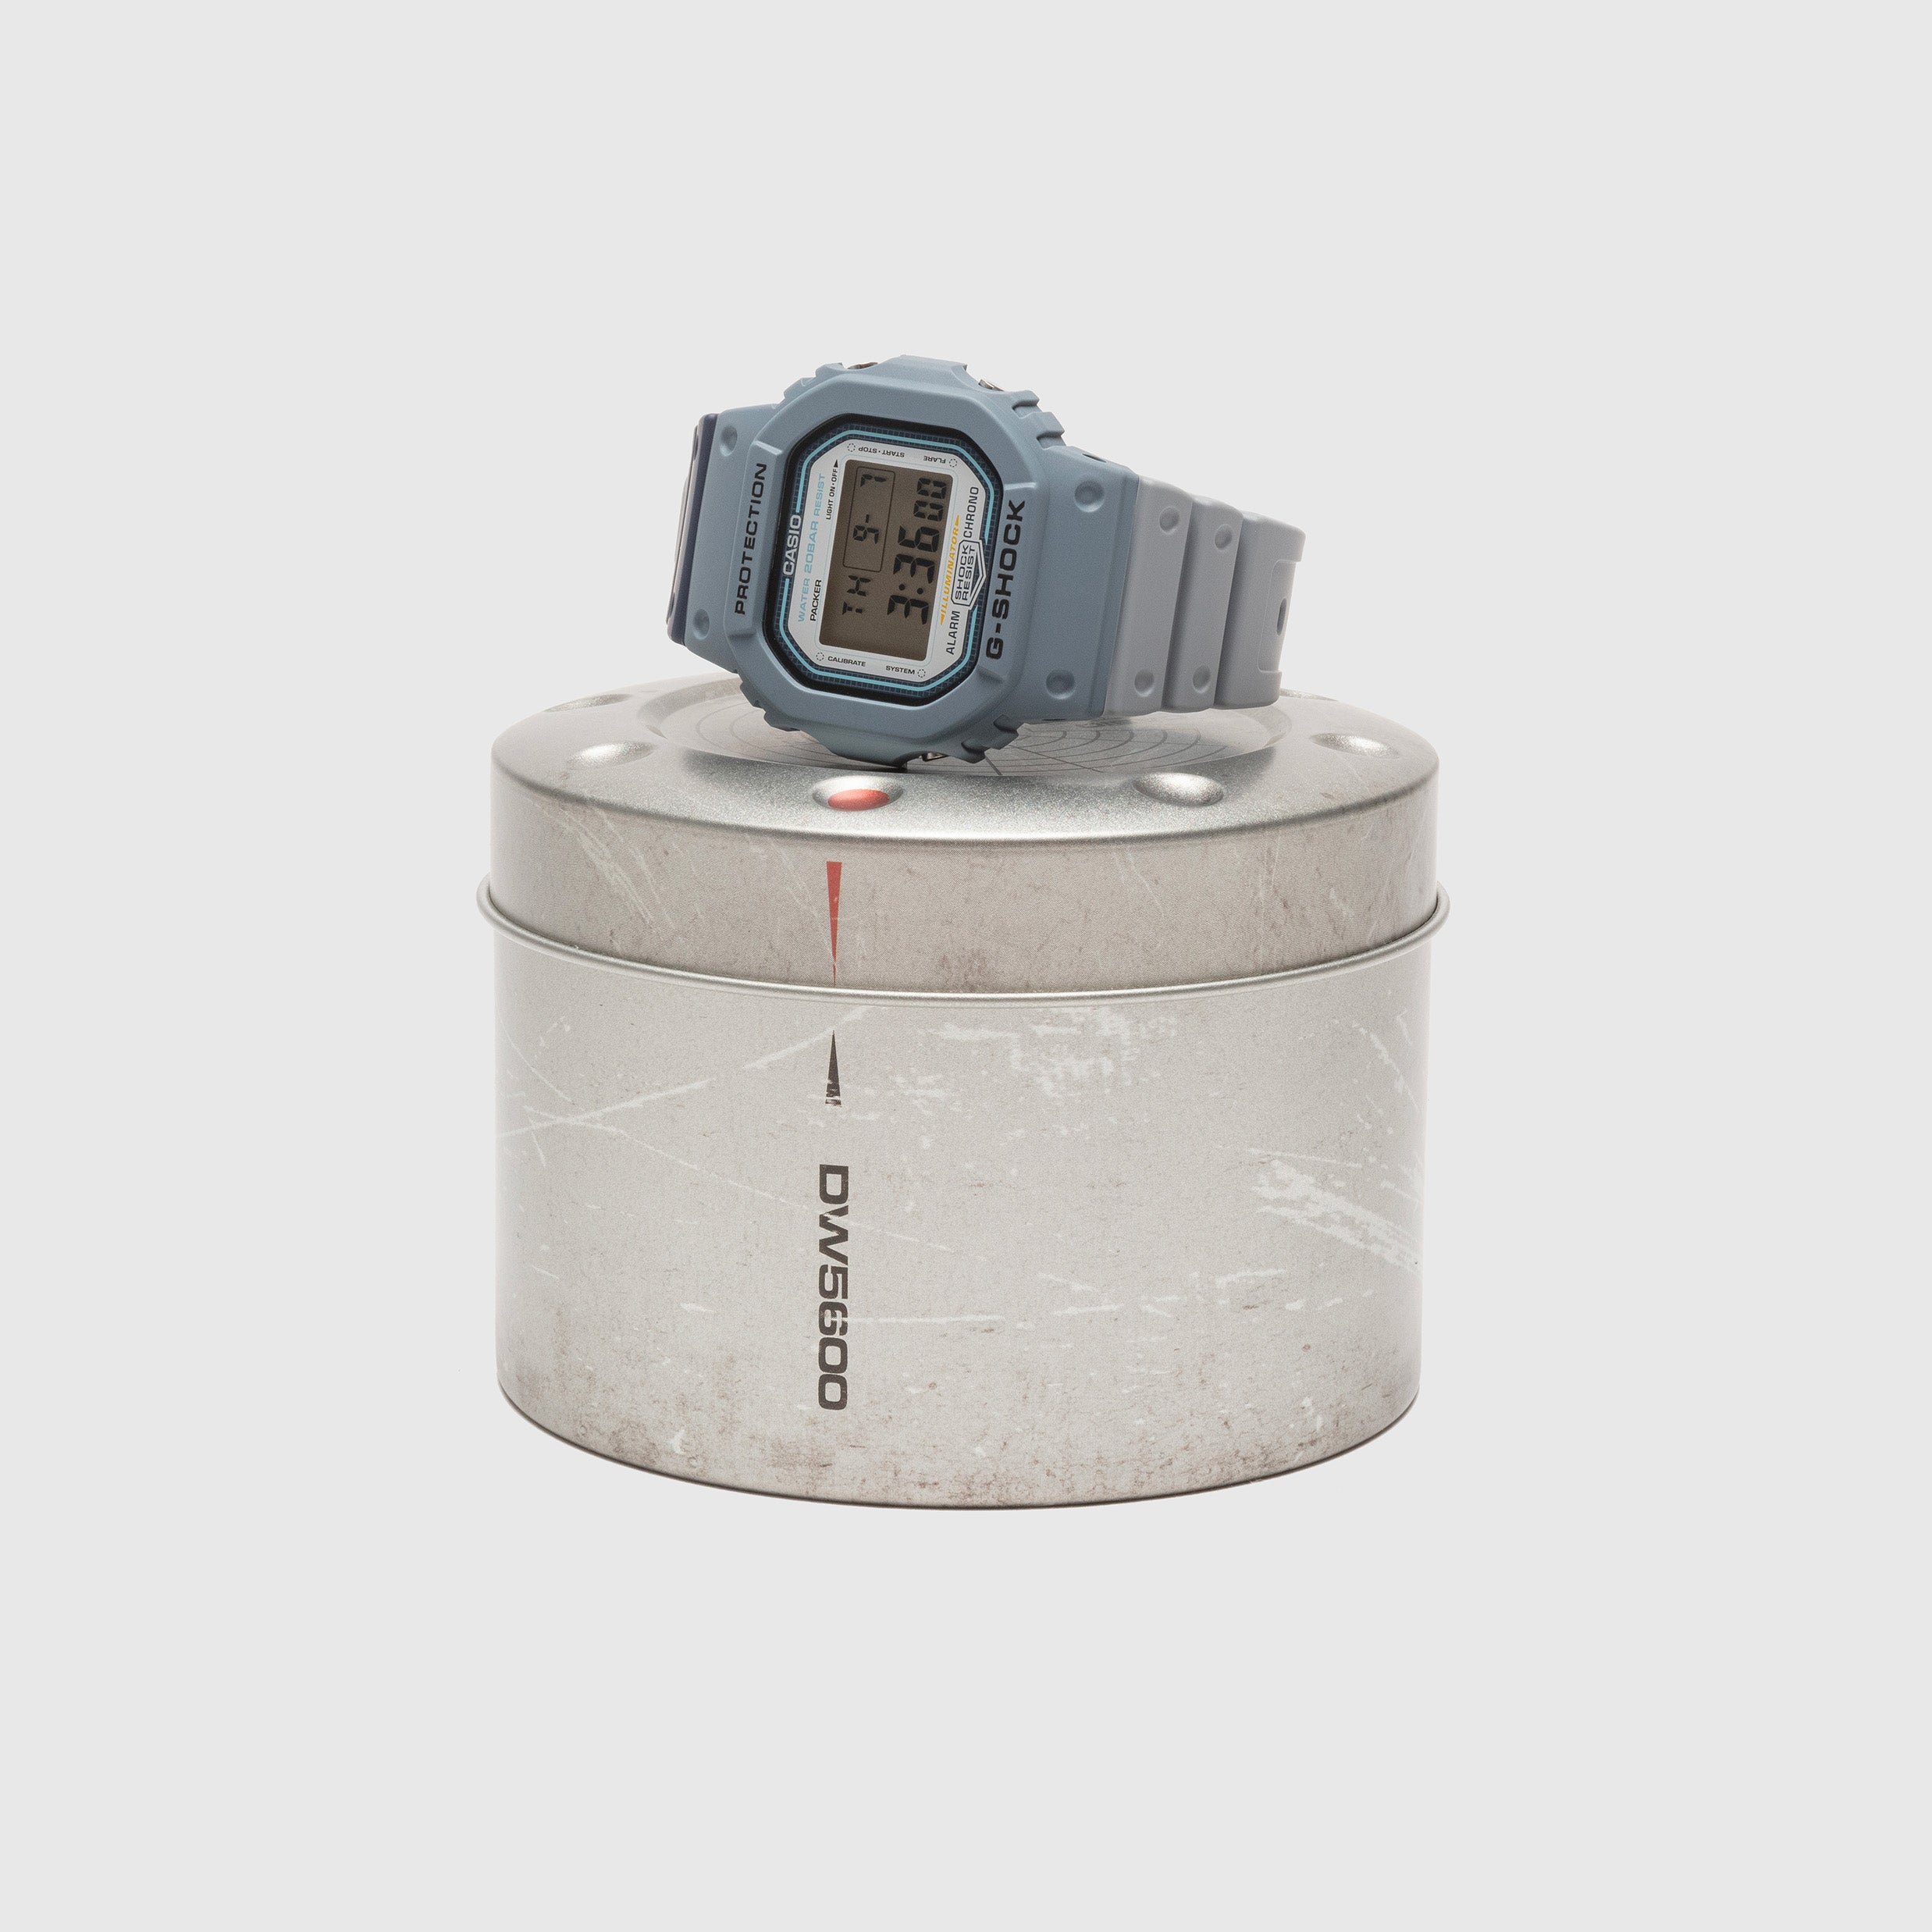 New Jersey sneaker boutique Packer to release G-Shock DW5600